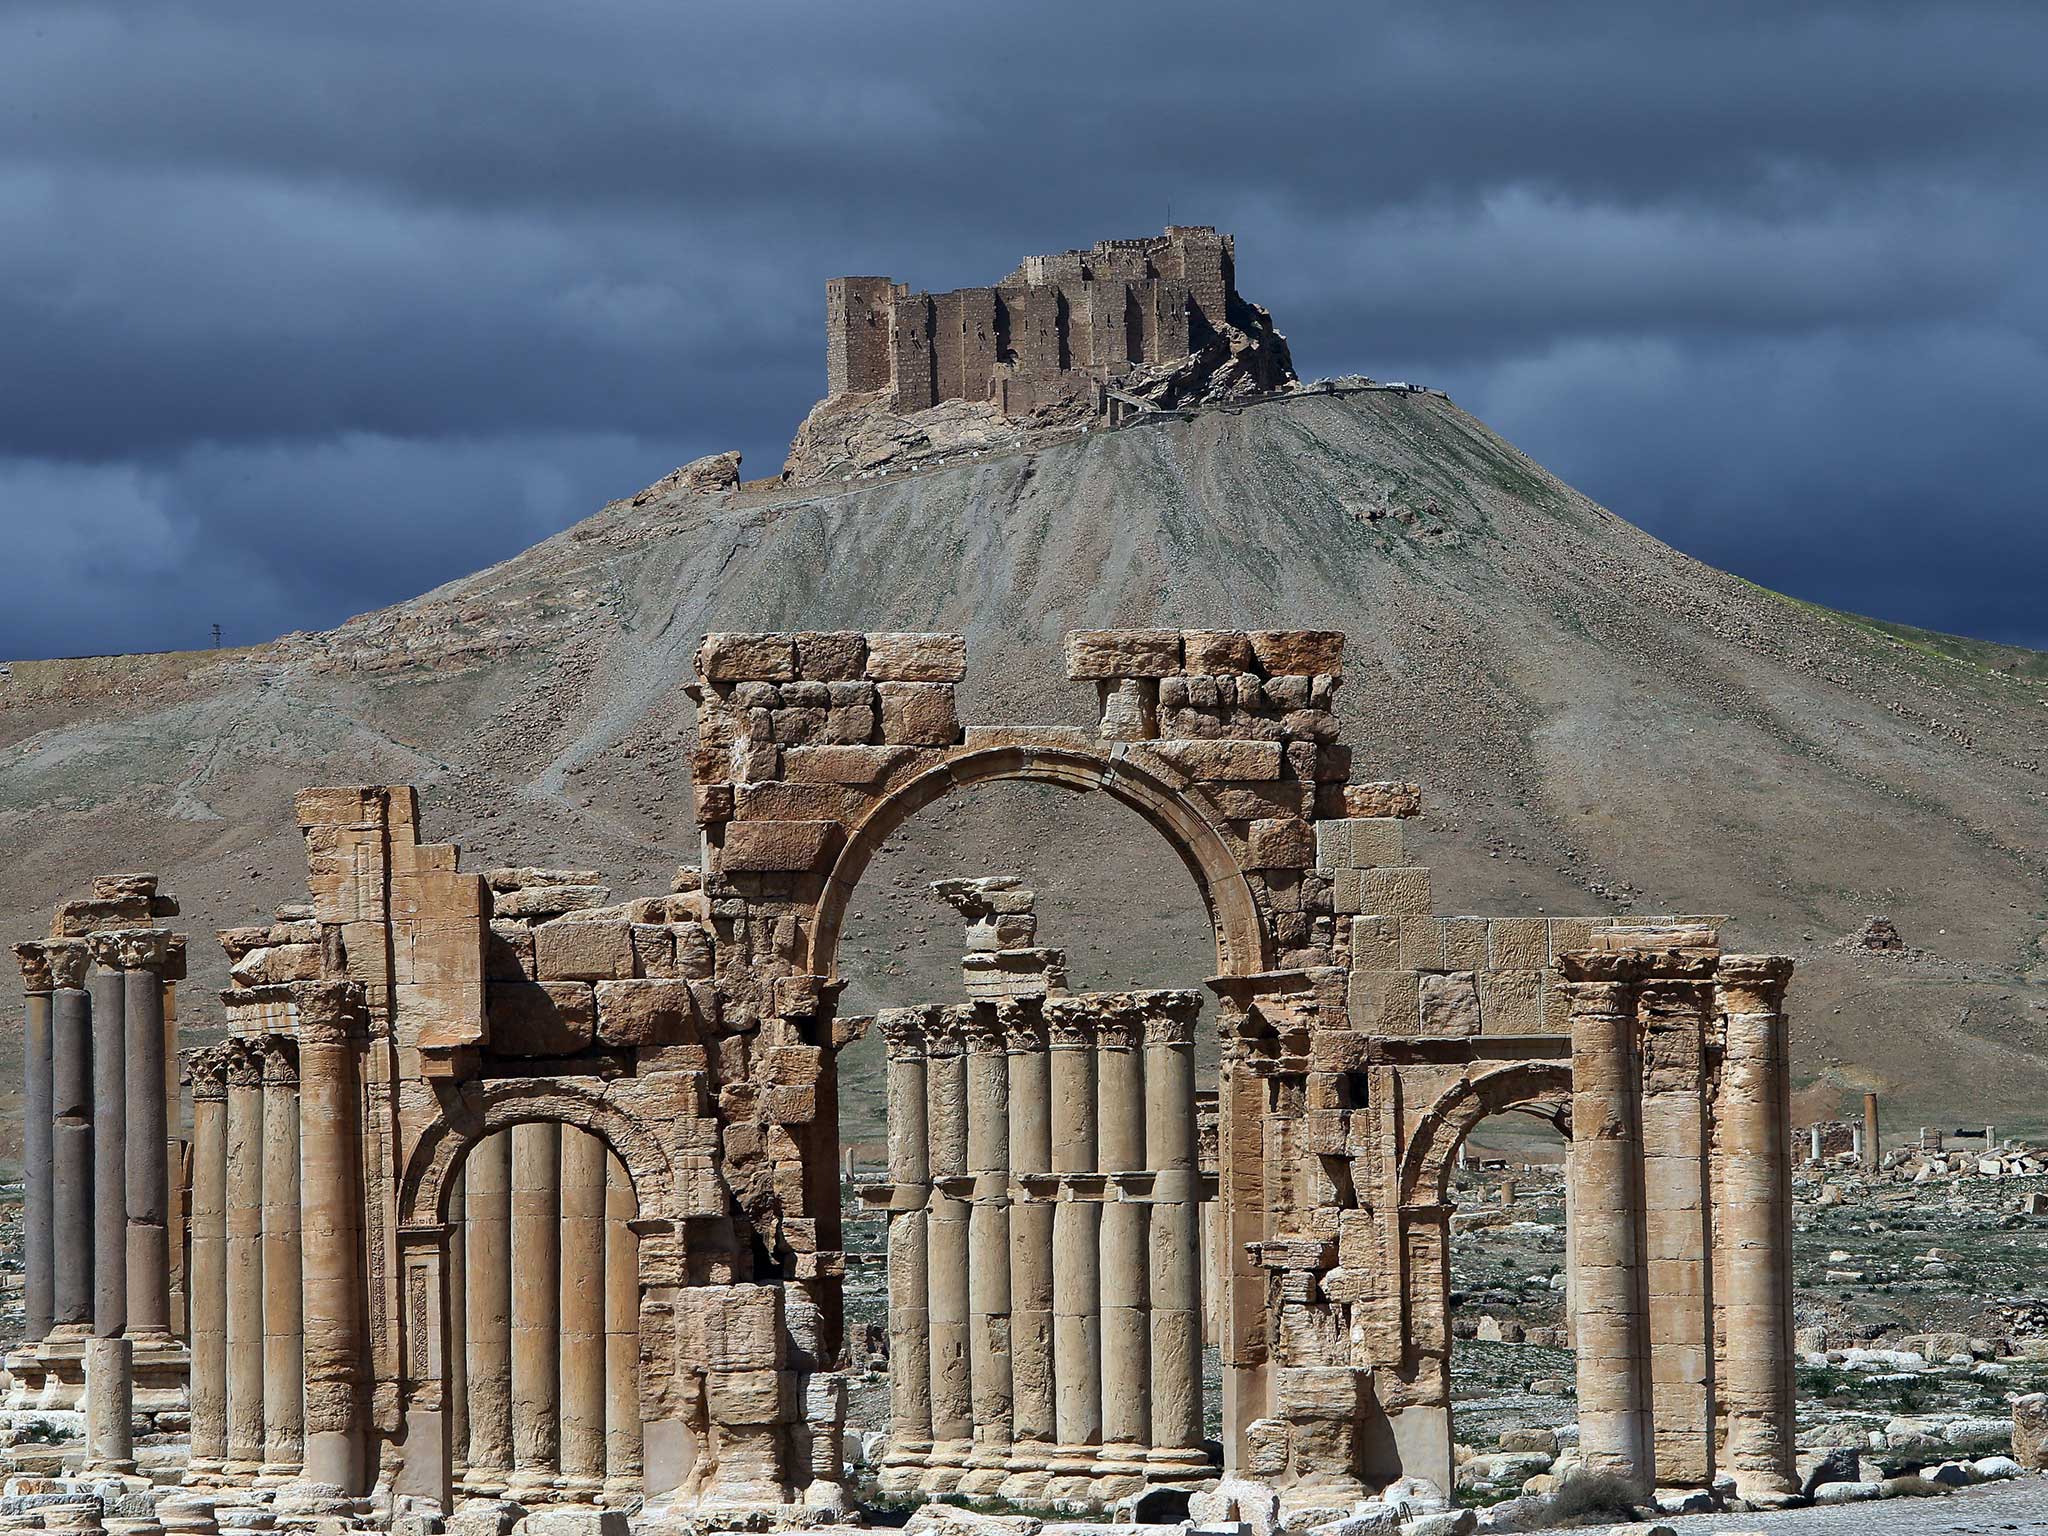 A view of the Palmyra ruins before their destruction by Isis